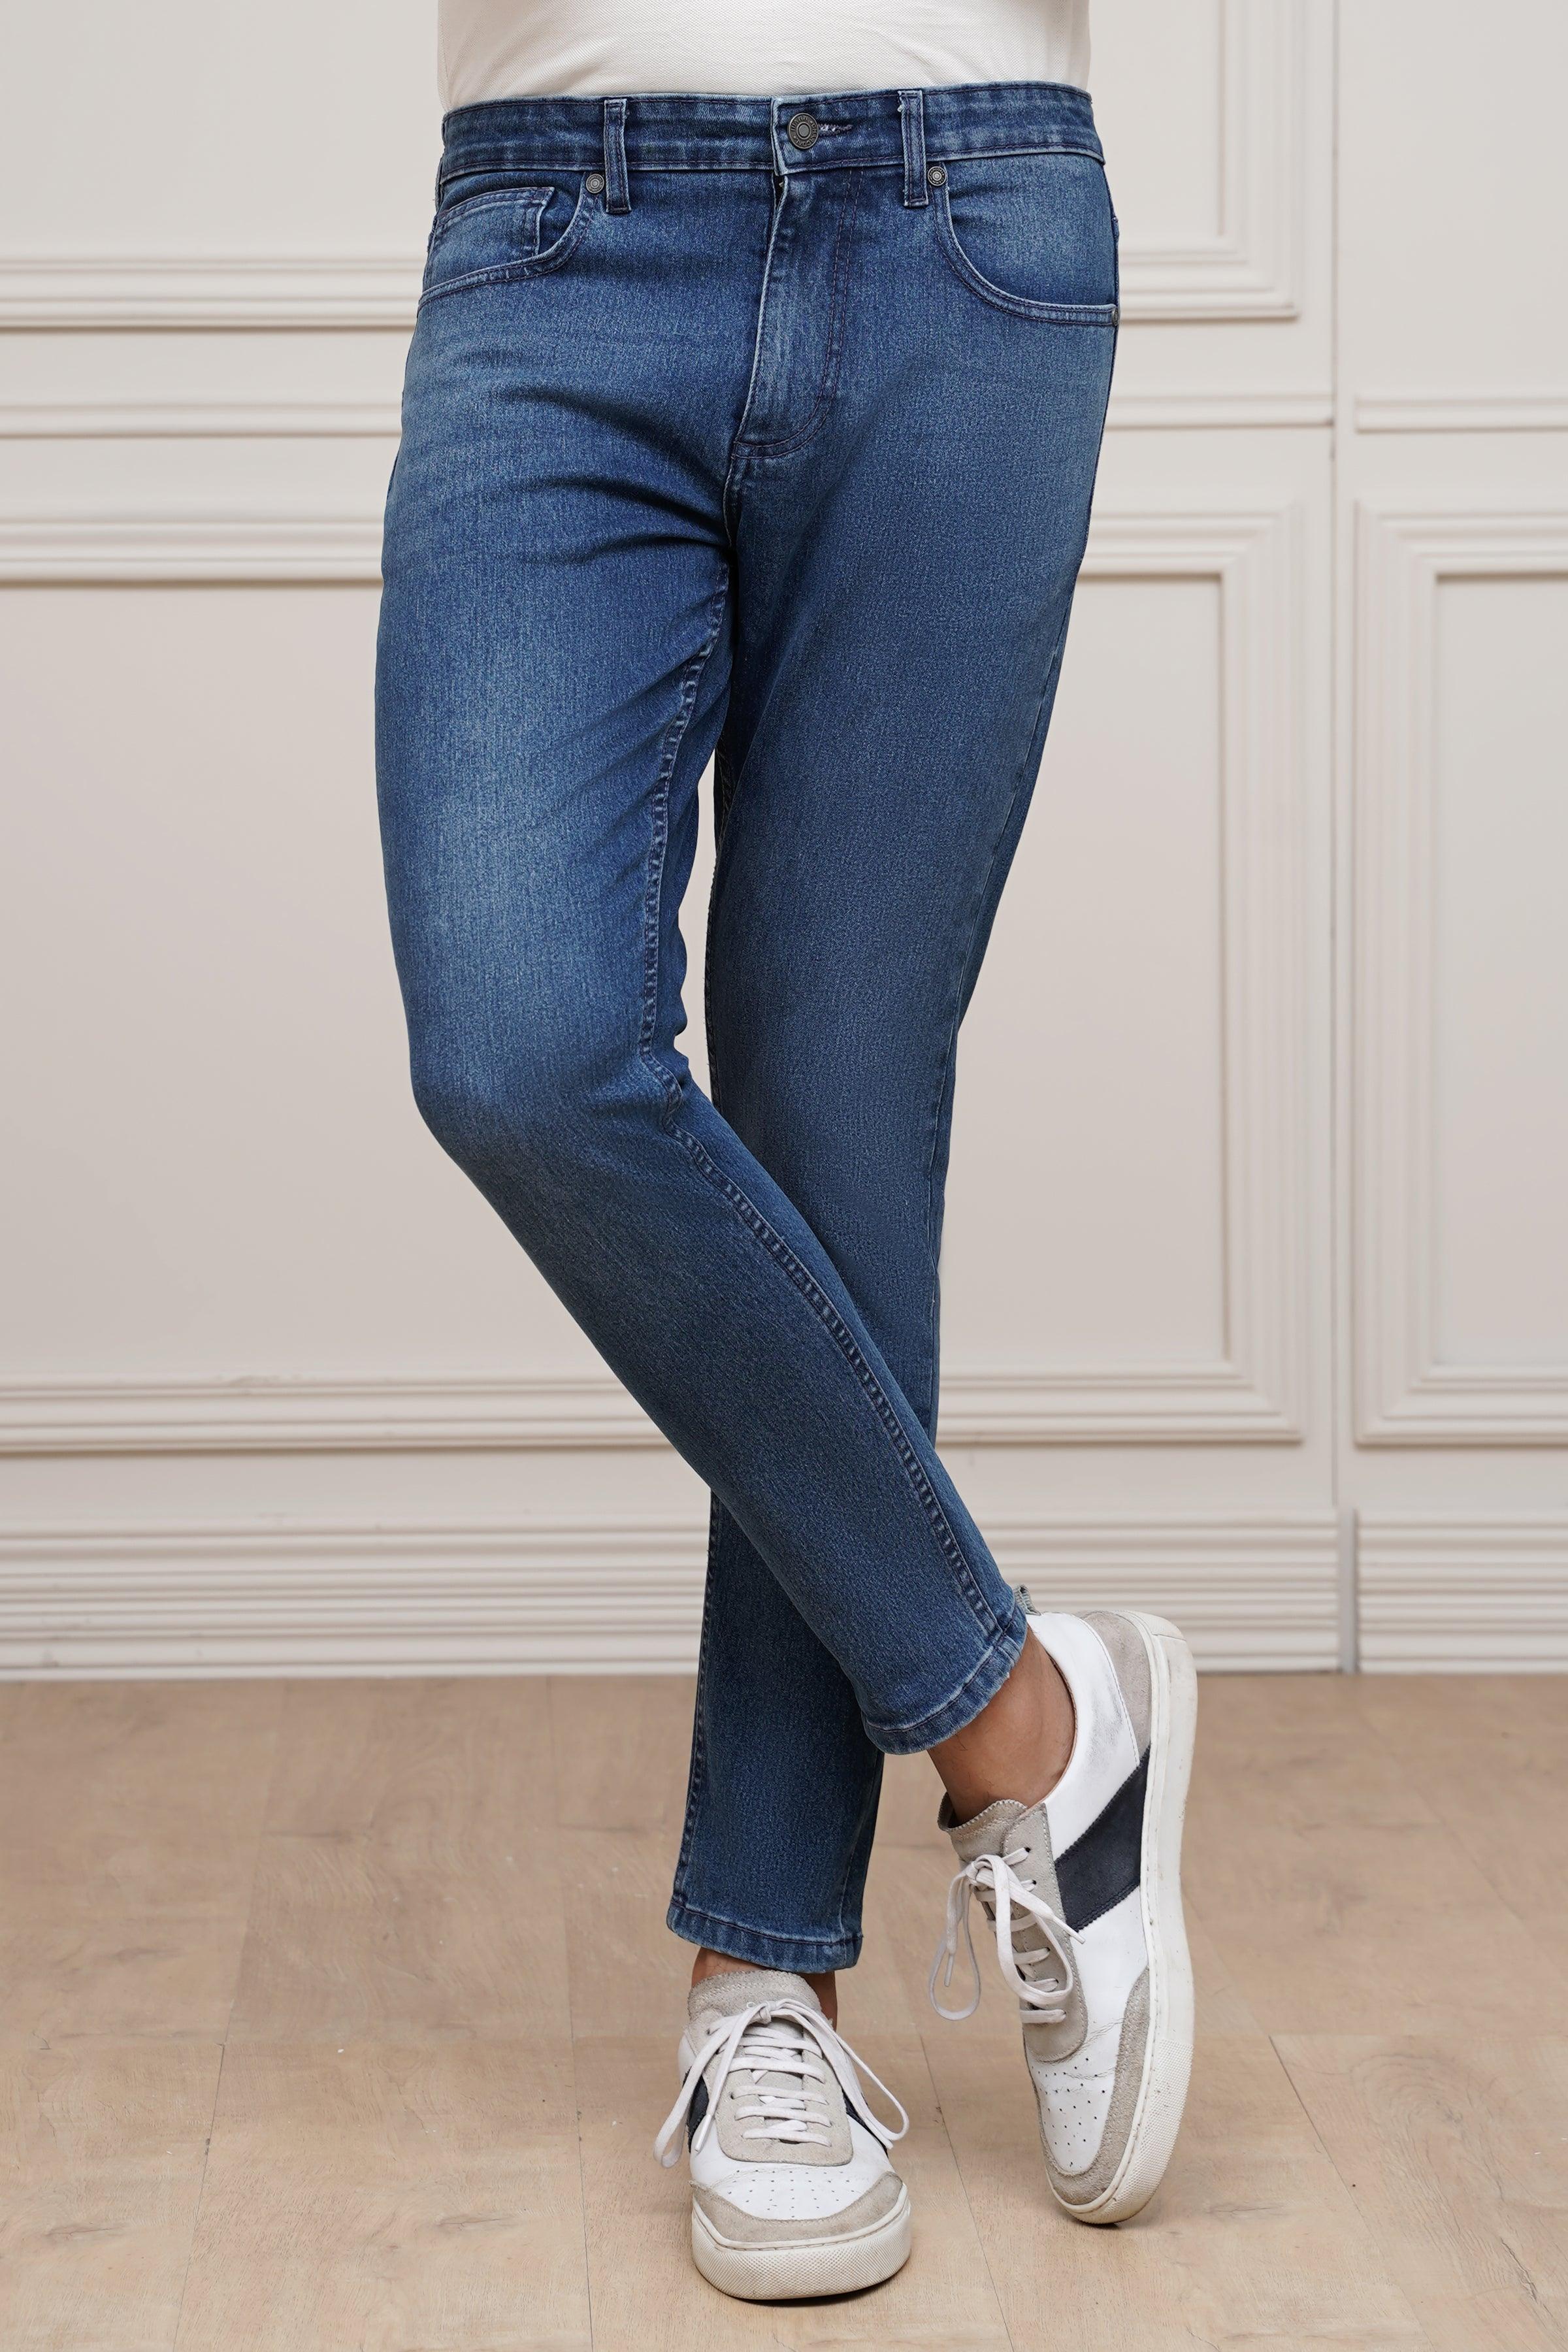 JEANS SKINNY LEG SKY BLUE at Charcoal Clothing